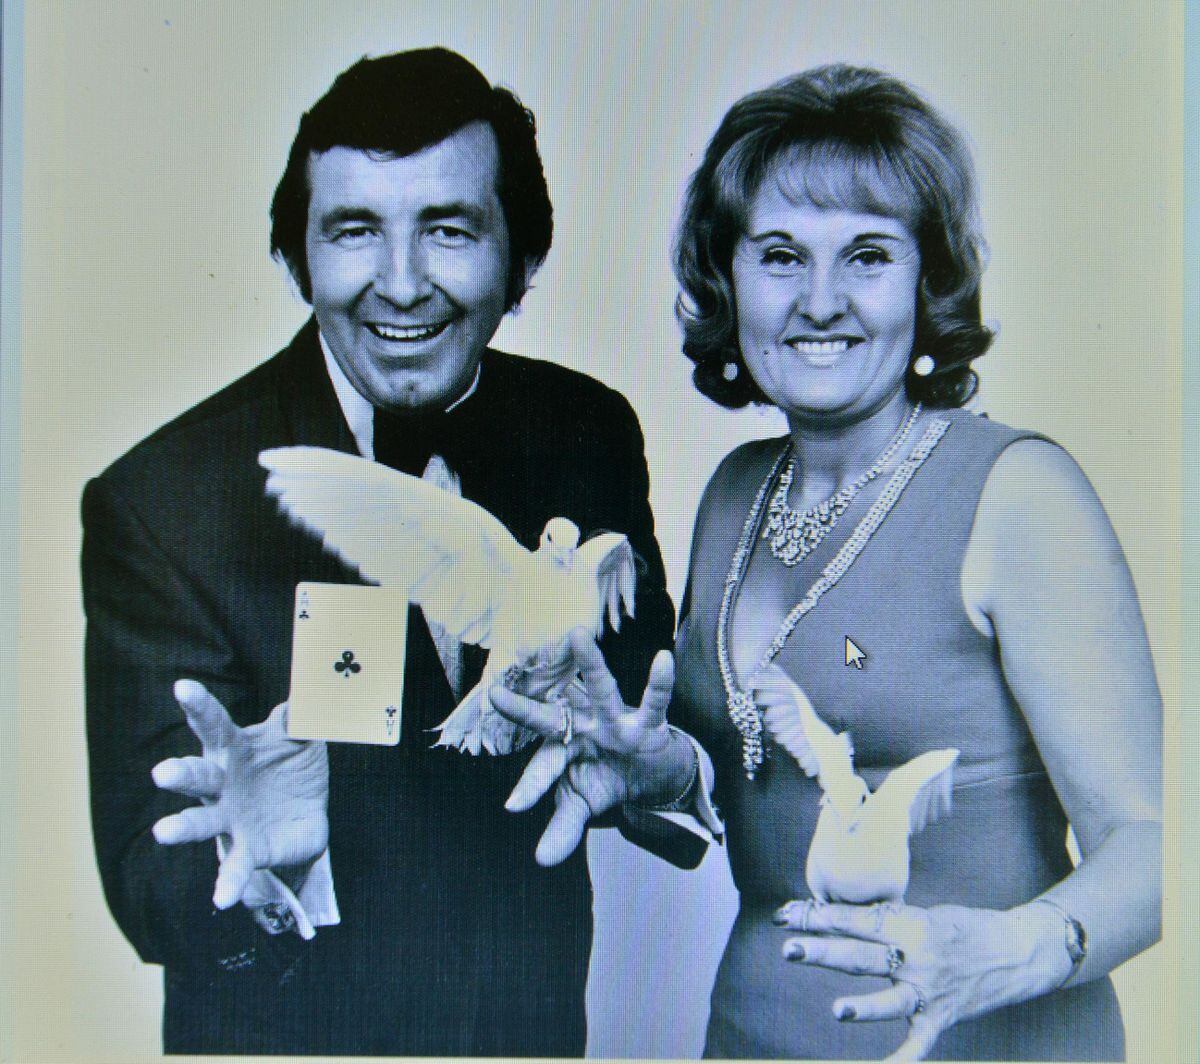 Geoff with his wife Molly Rushworth in 1975